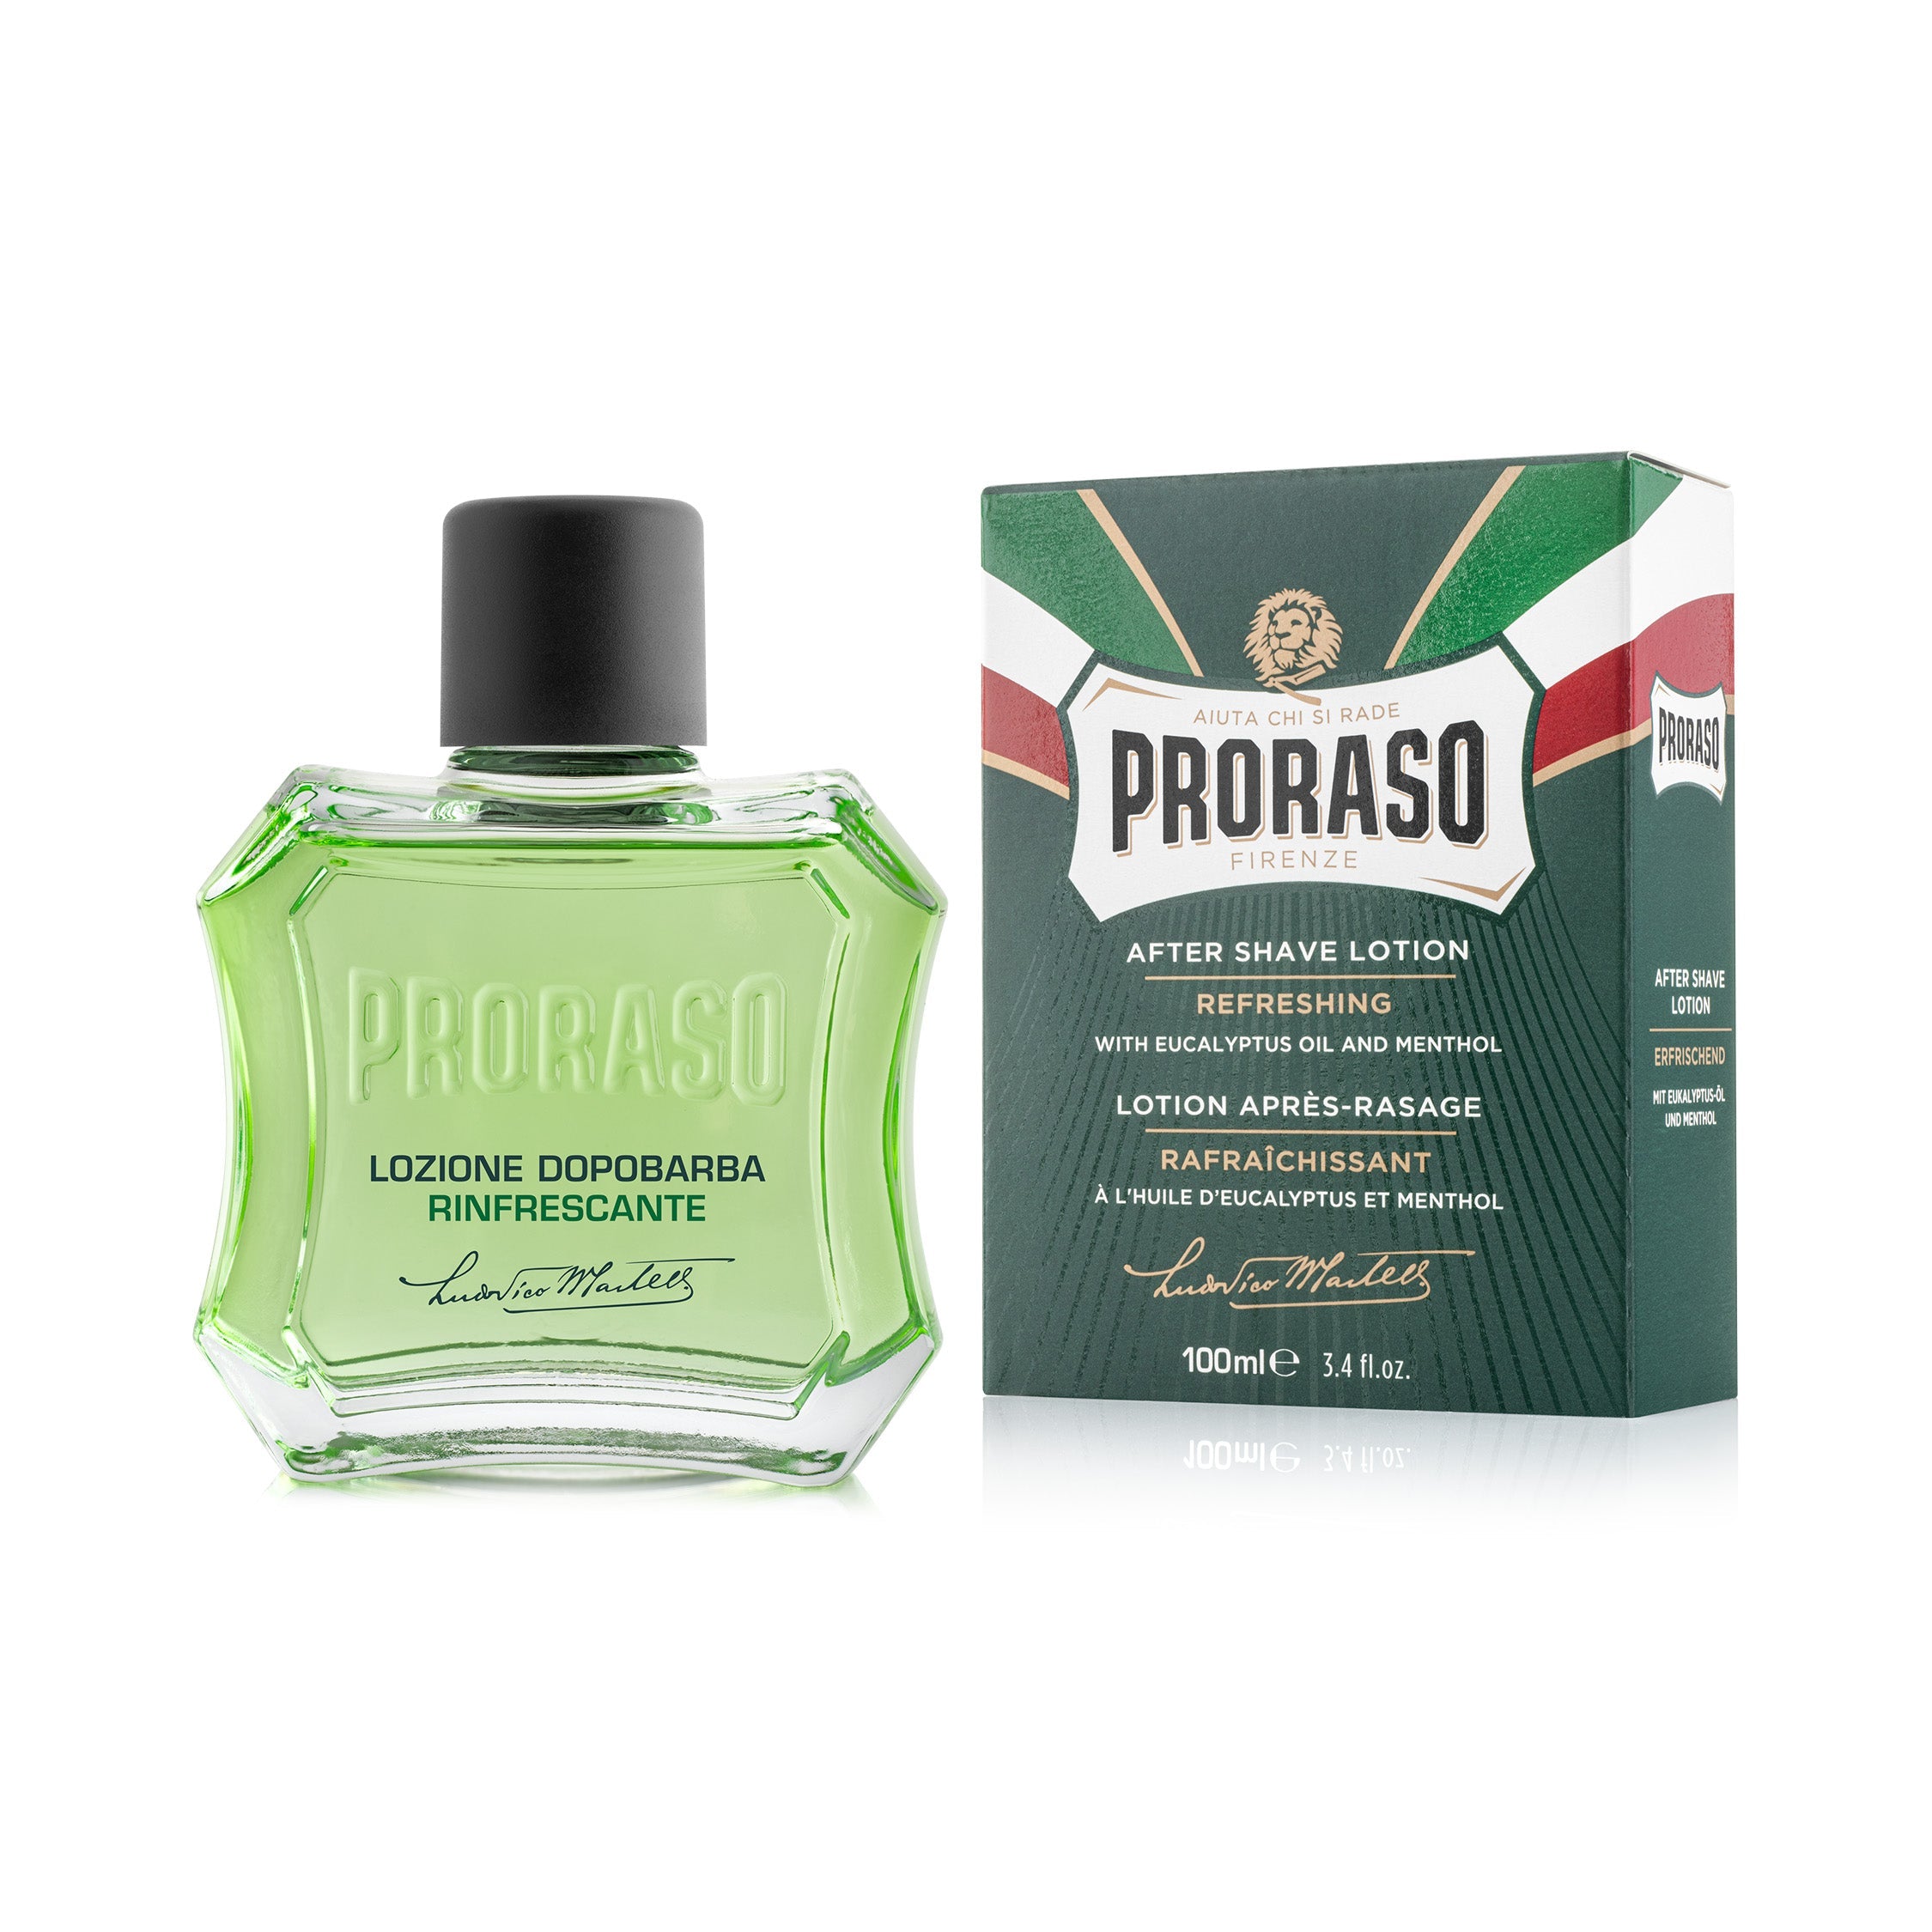 Proraso After Shave Lotion Refreshing with Eucalyptus Oil and Menthol